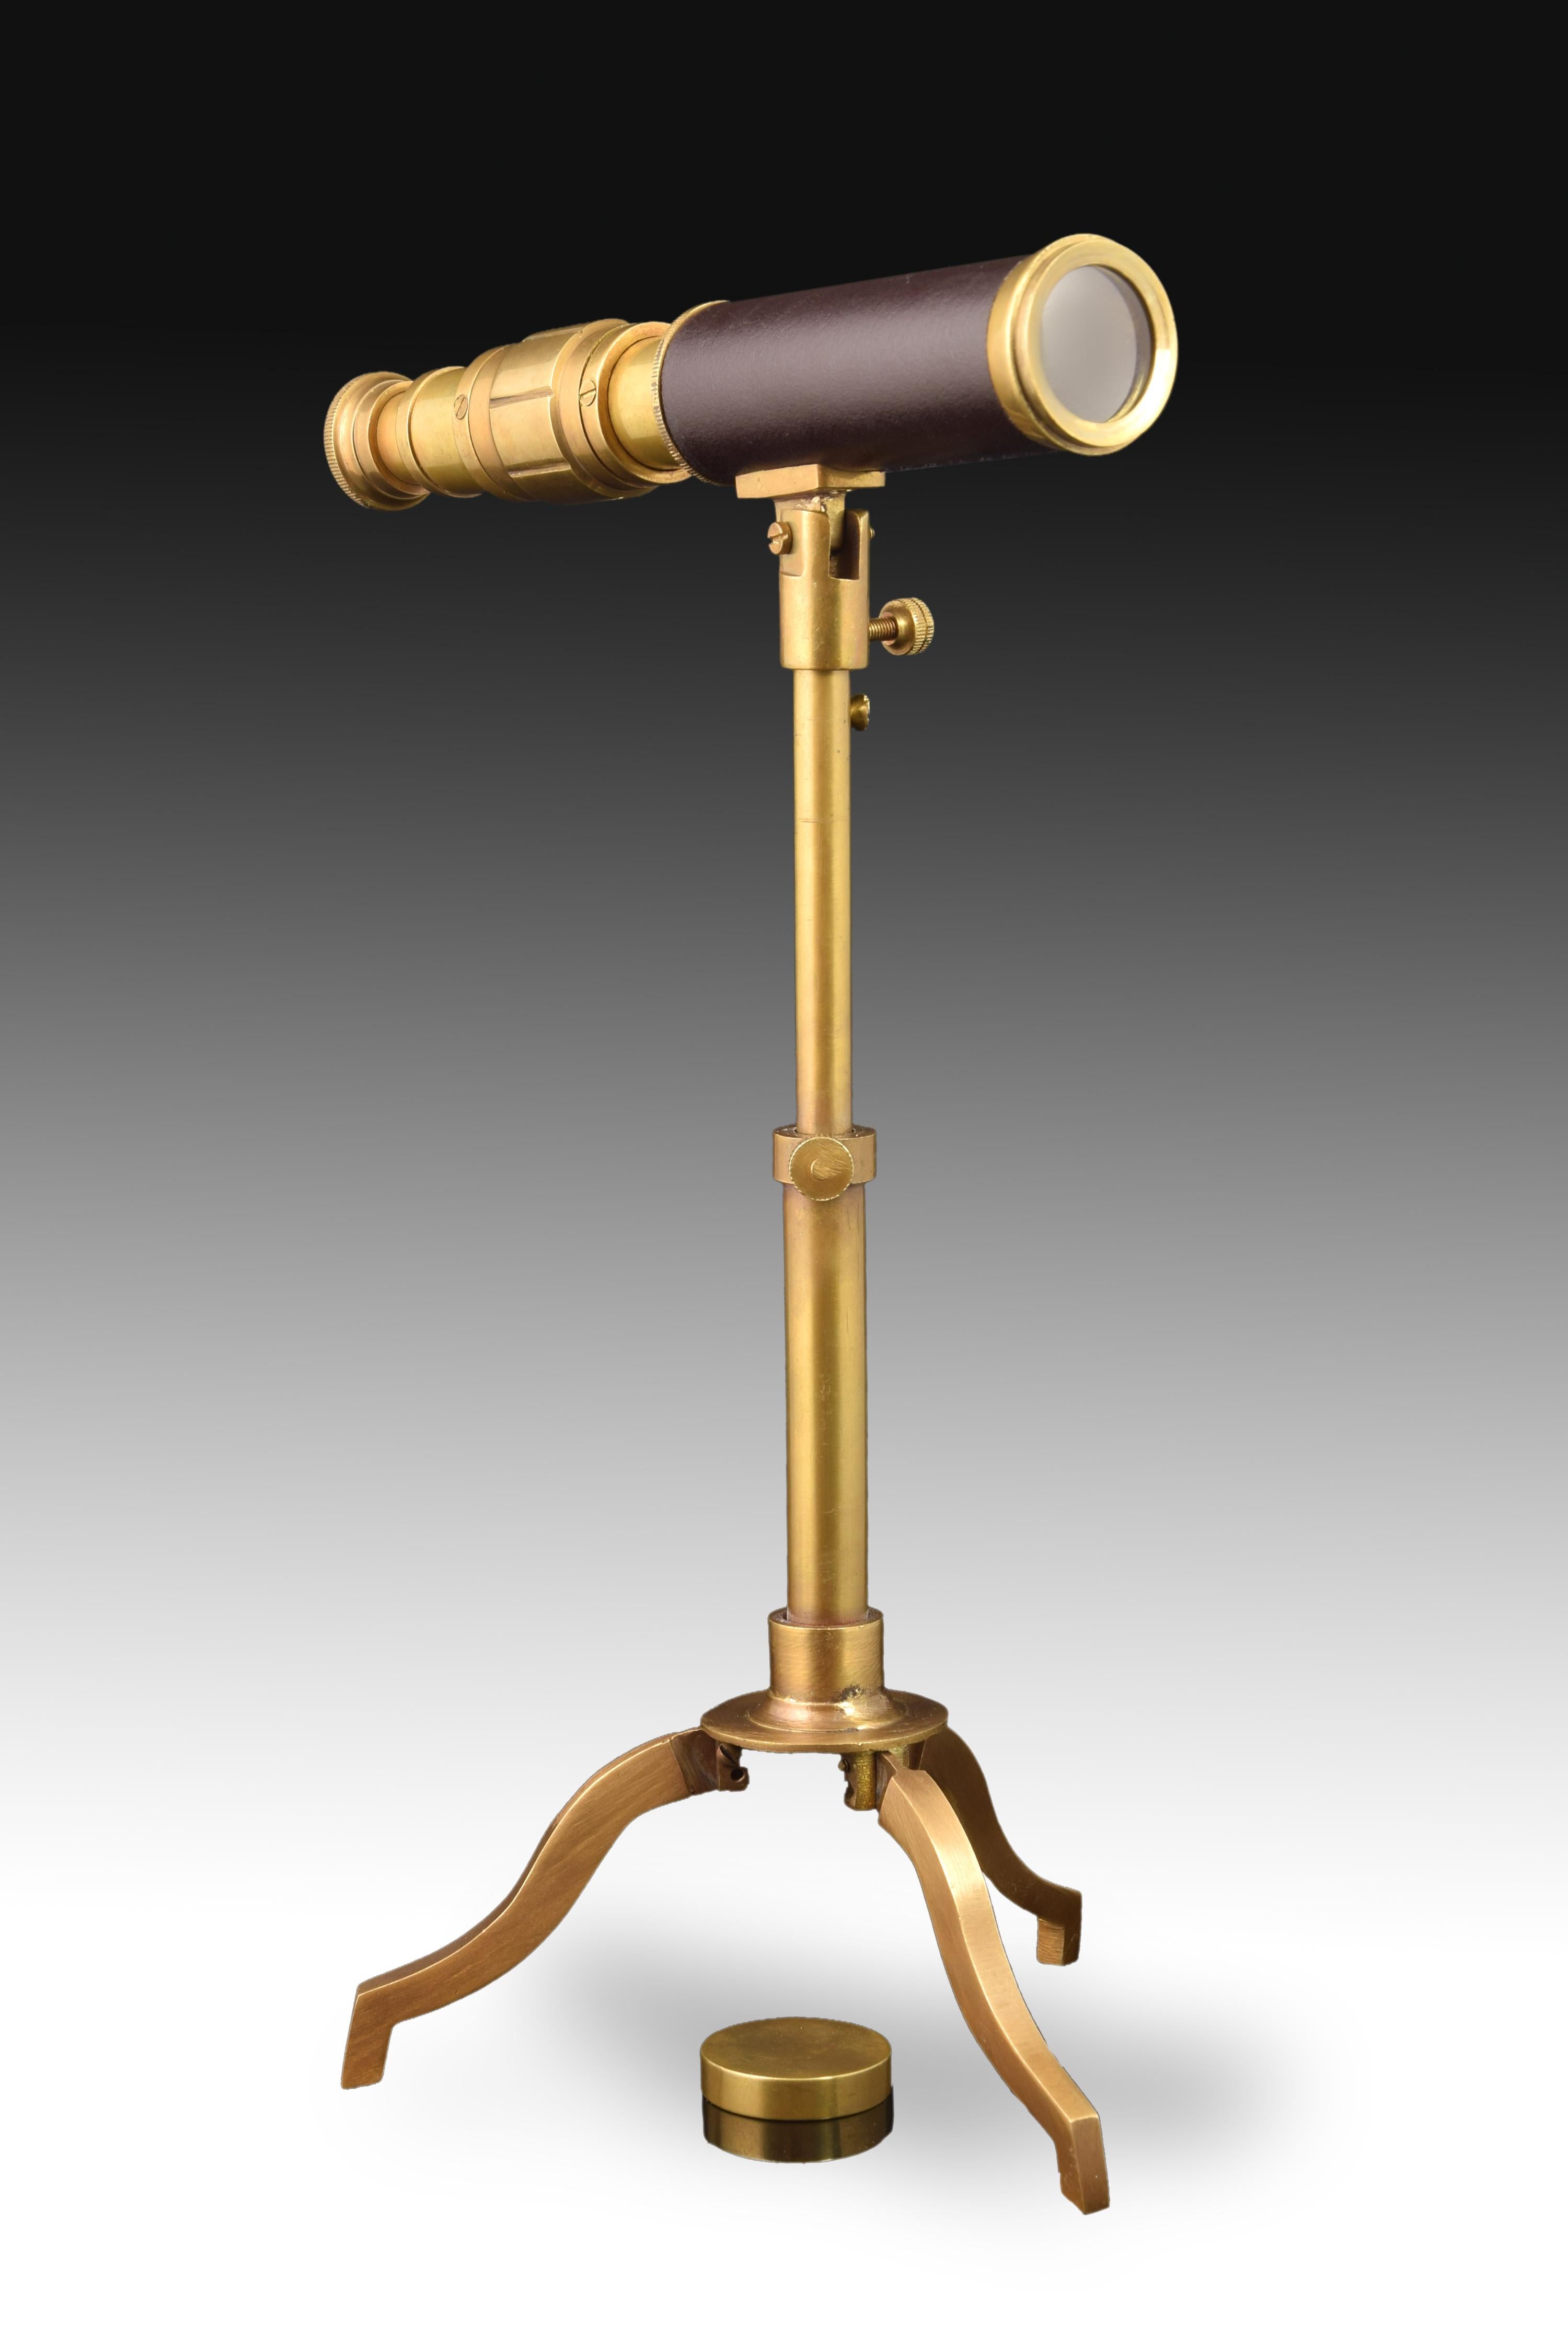 Telescope with tripod. gold metallic antique finish 
Decorative use, not functional. 
Gilt metal telescope decorated with a dark band standing on a tripod, also gilt metal, with three legs. The cleanliness of the lines and the combination of colors